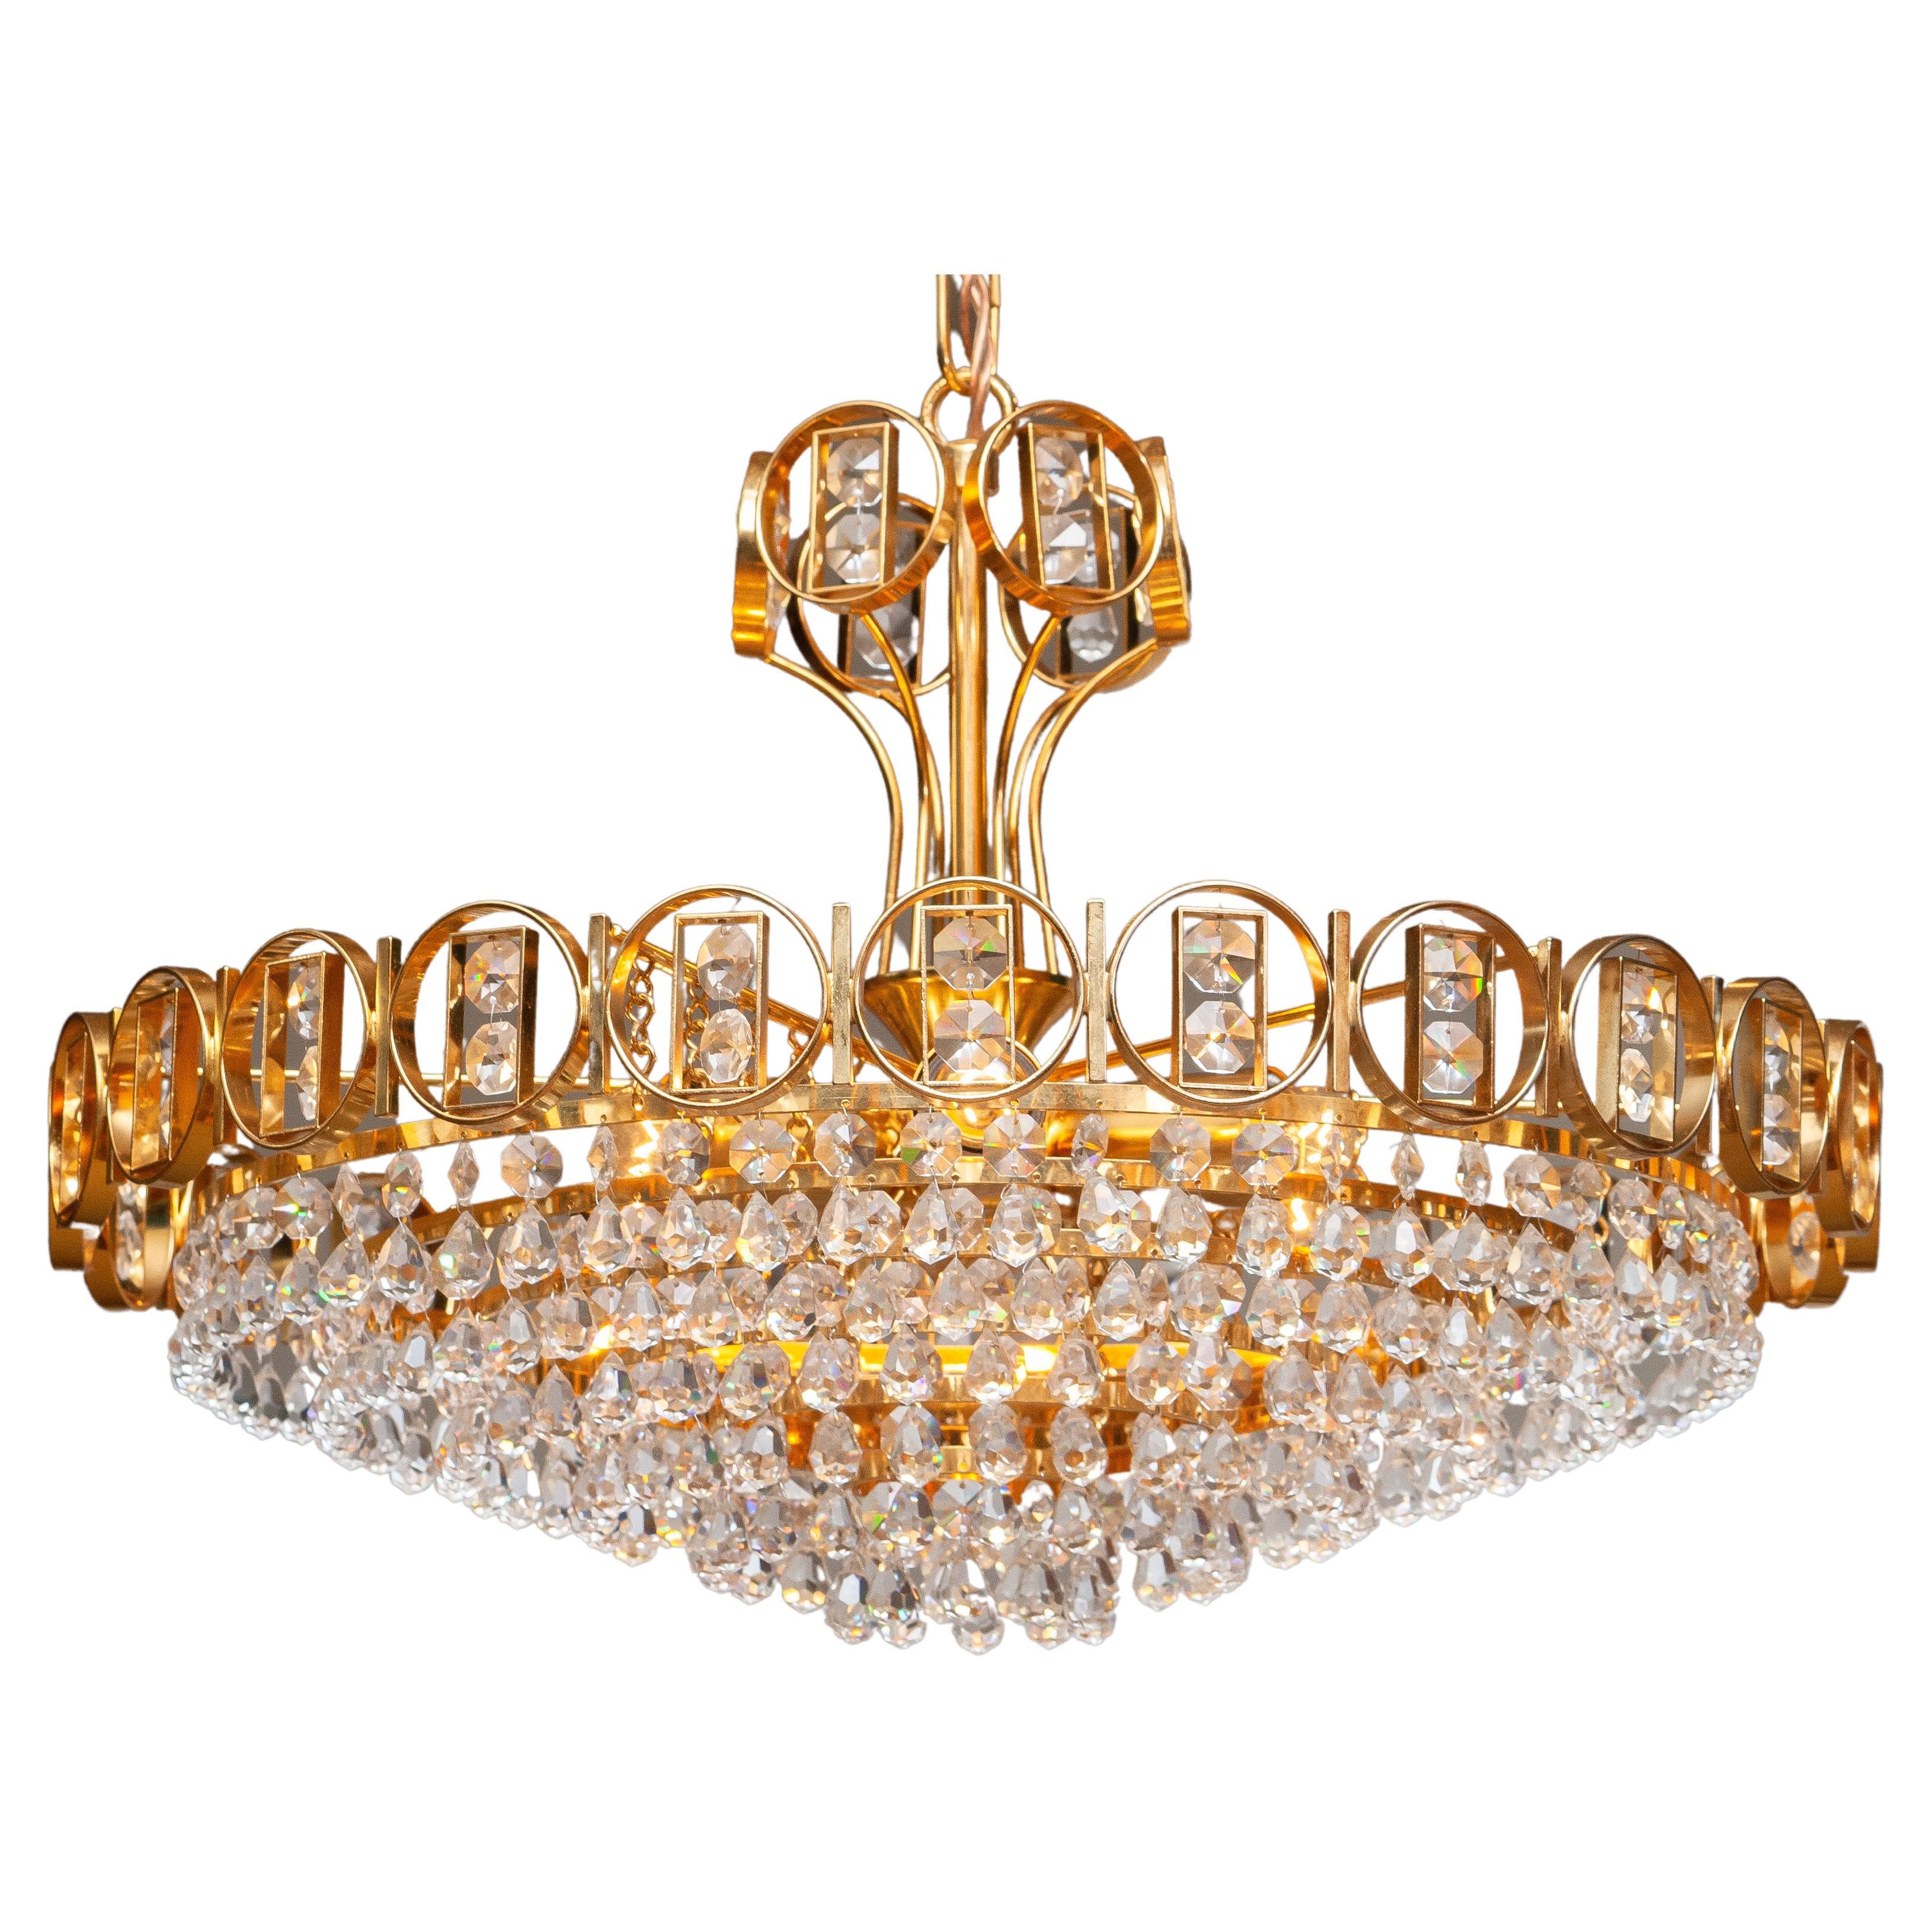 1970s, Gold-Plated Brass Chandelier with Faceted Crystals Made by Palwa, Germany For Sale